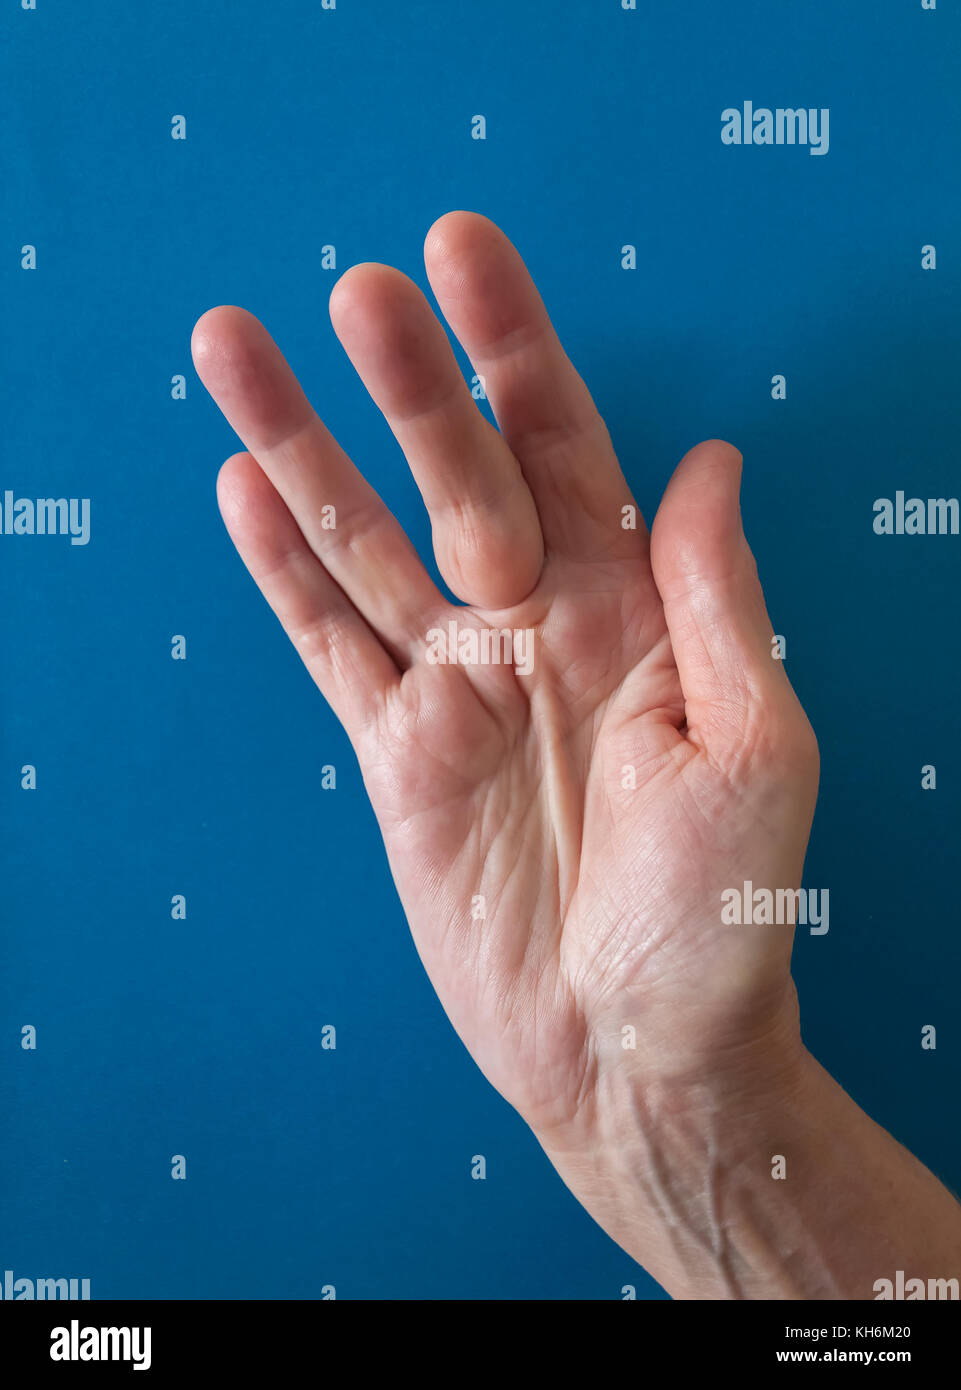 Dupuytren's Contracture deformity: a cord in the palm of hand (with a hard nodule at base of the middle finger) pulls finger into a bent position. Stock Photo